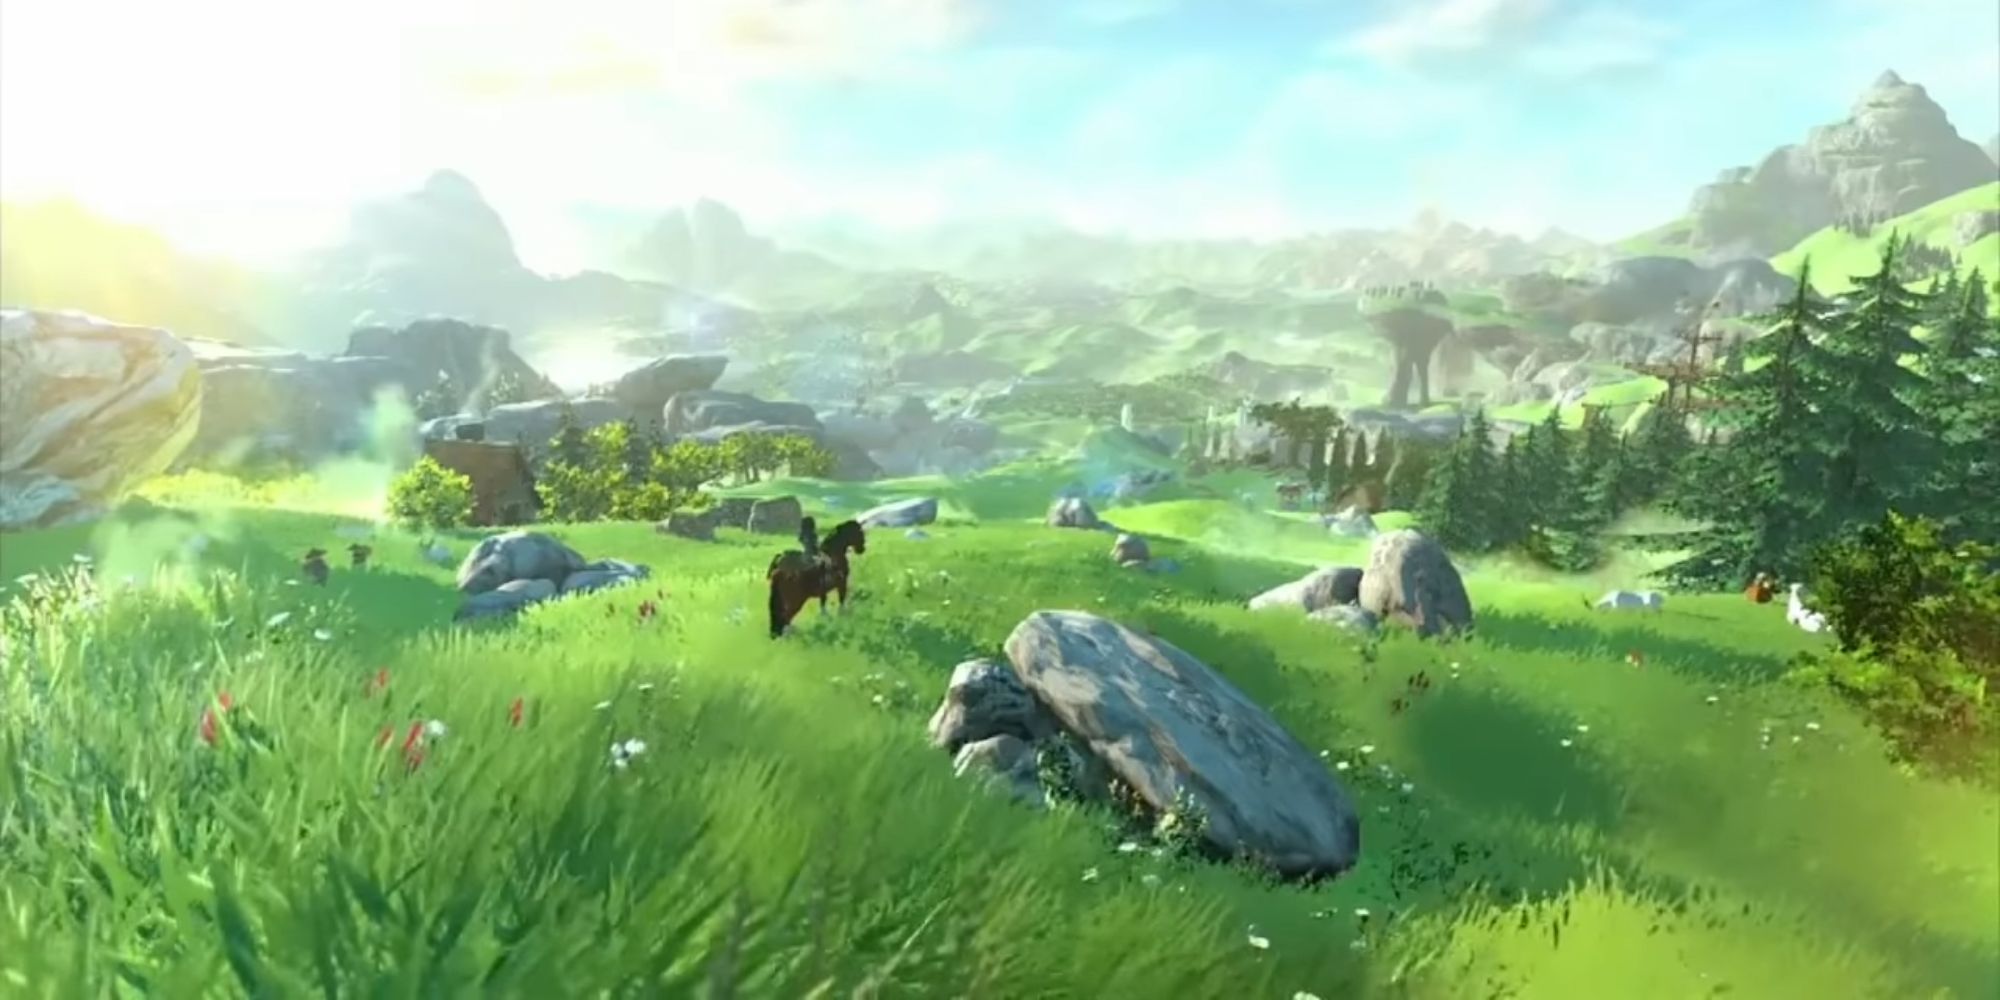 Link and Epona standing in Hyrule Field, in the reveal trailer of Breath of the Wild.